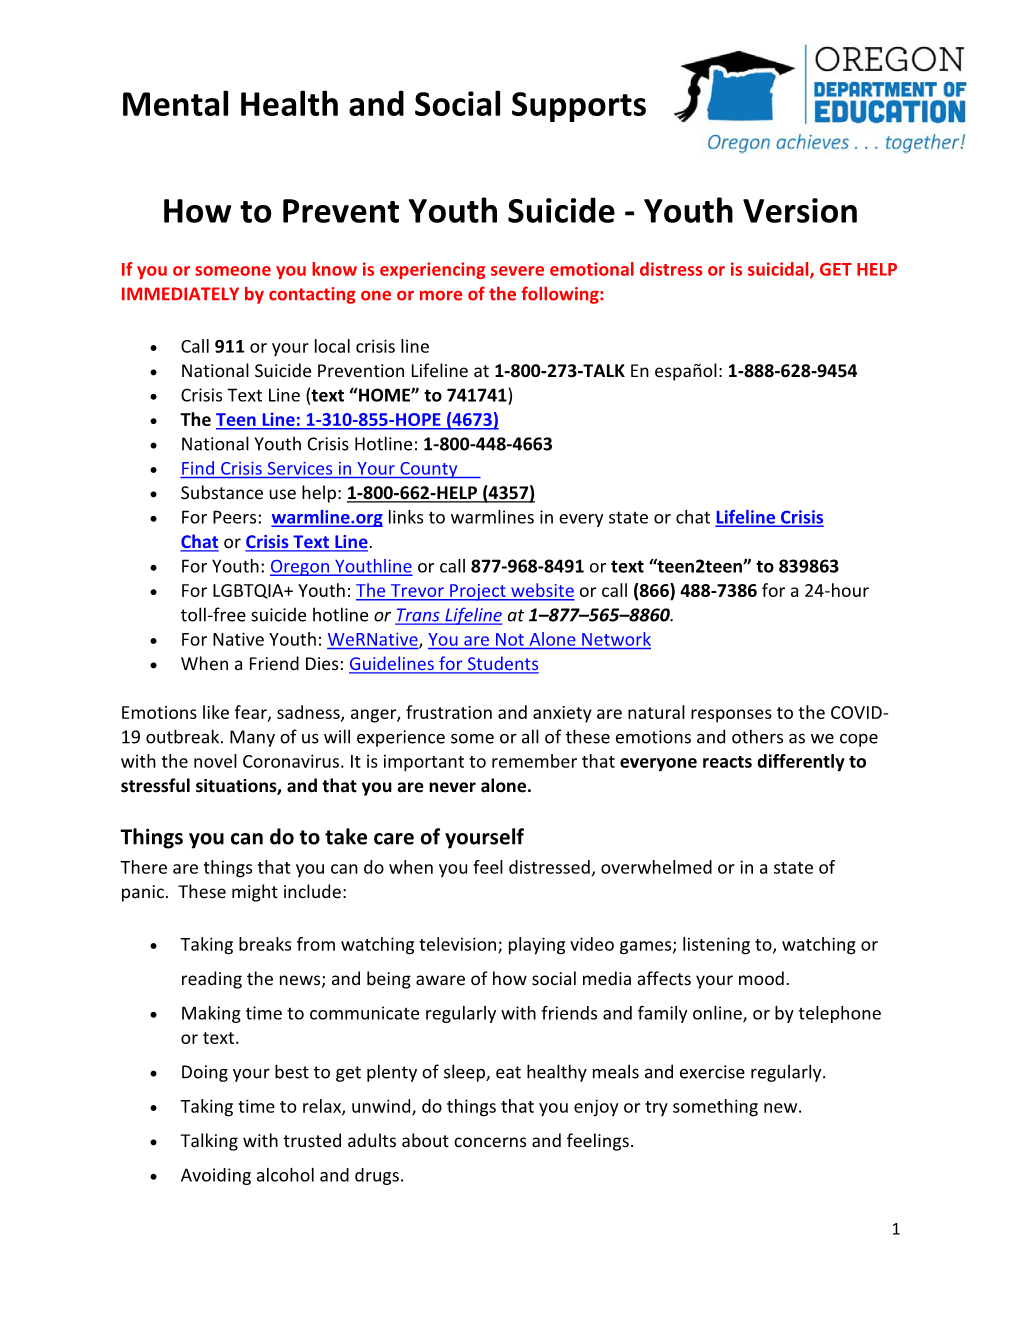 How to Prevent Youth Suicide - Youth Version